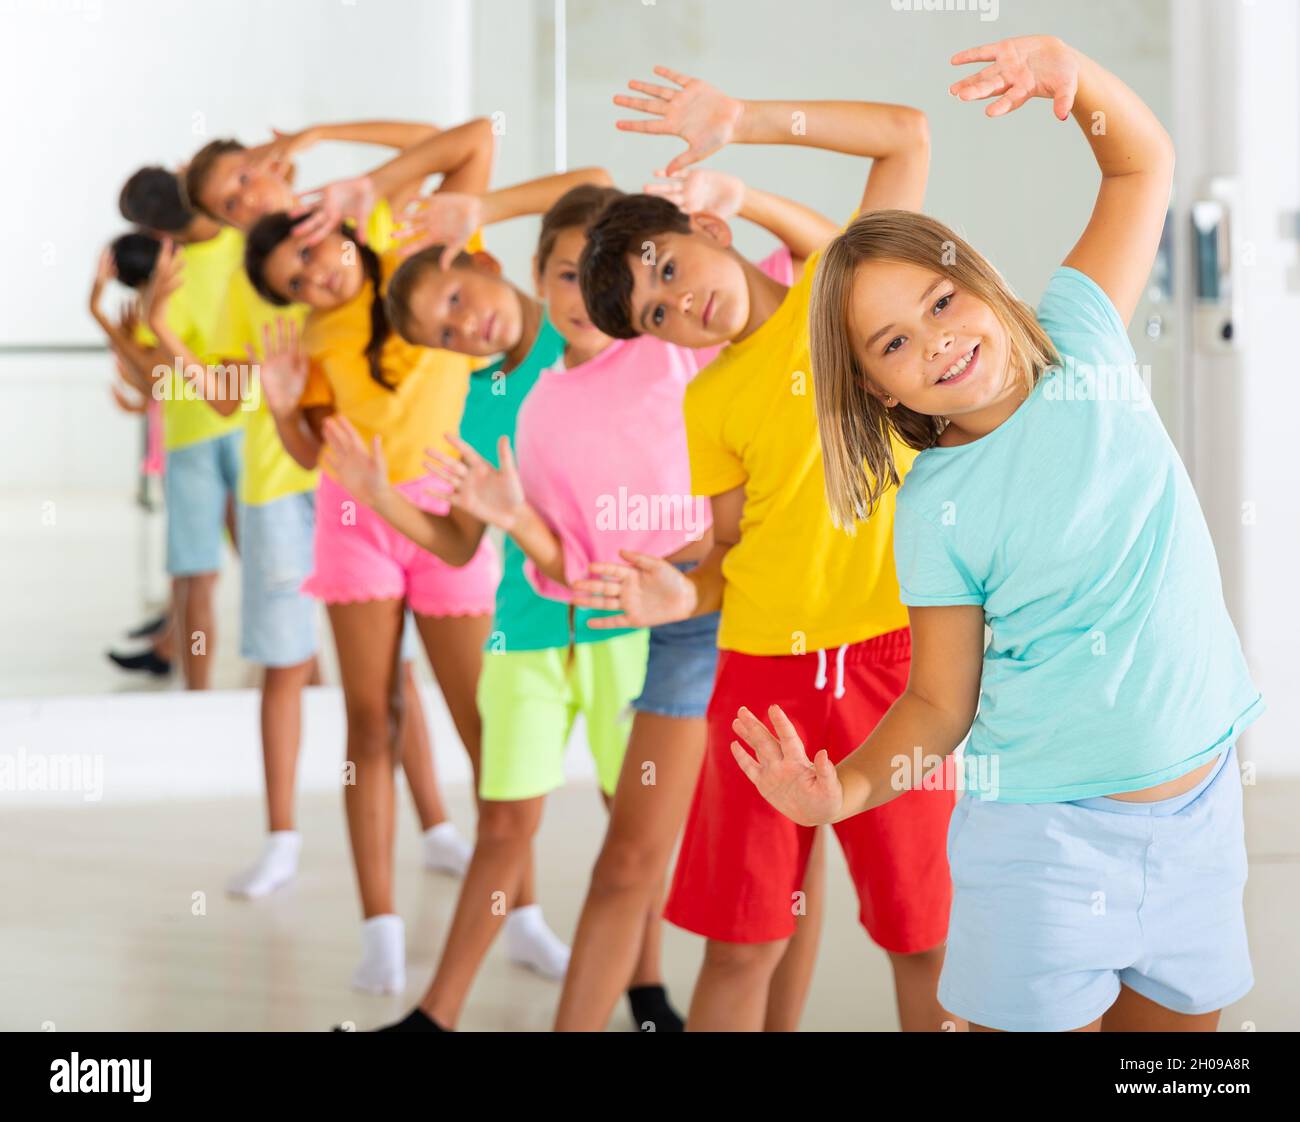 Boys and girls standing in row in dance room Stock Photo - Alamy